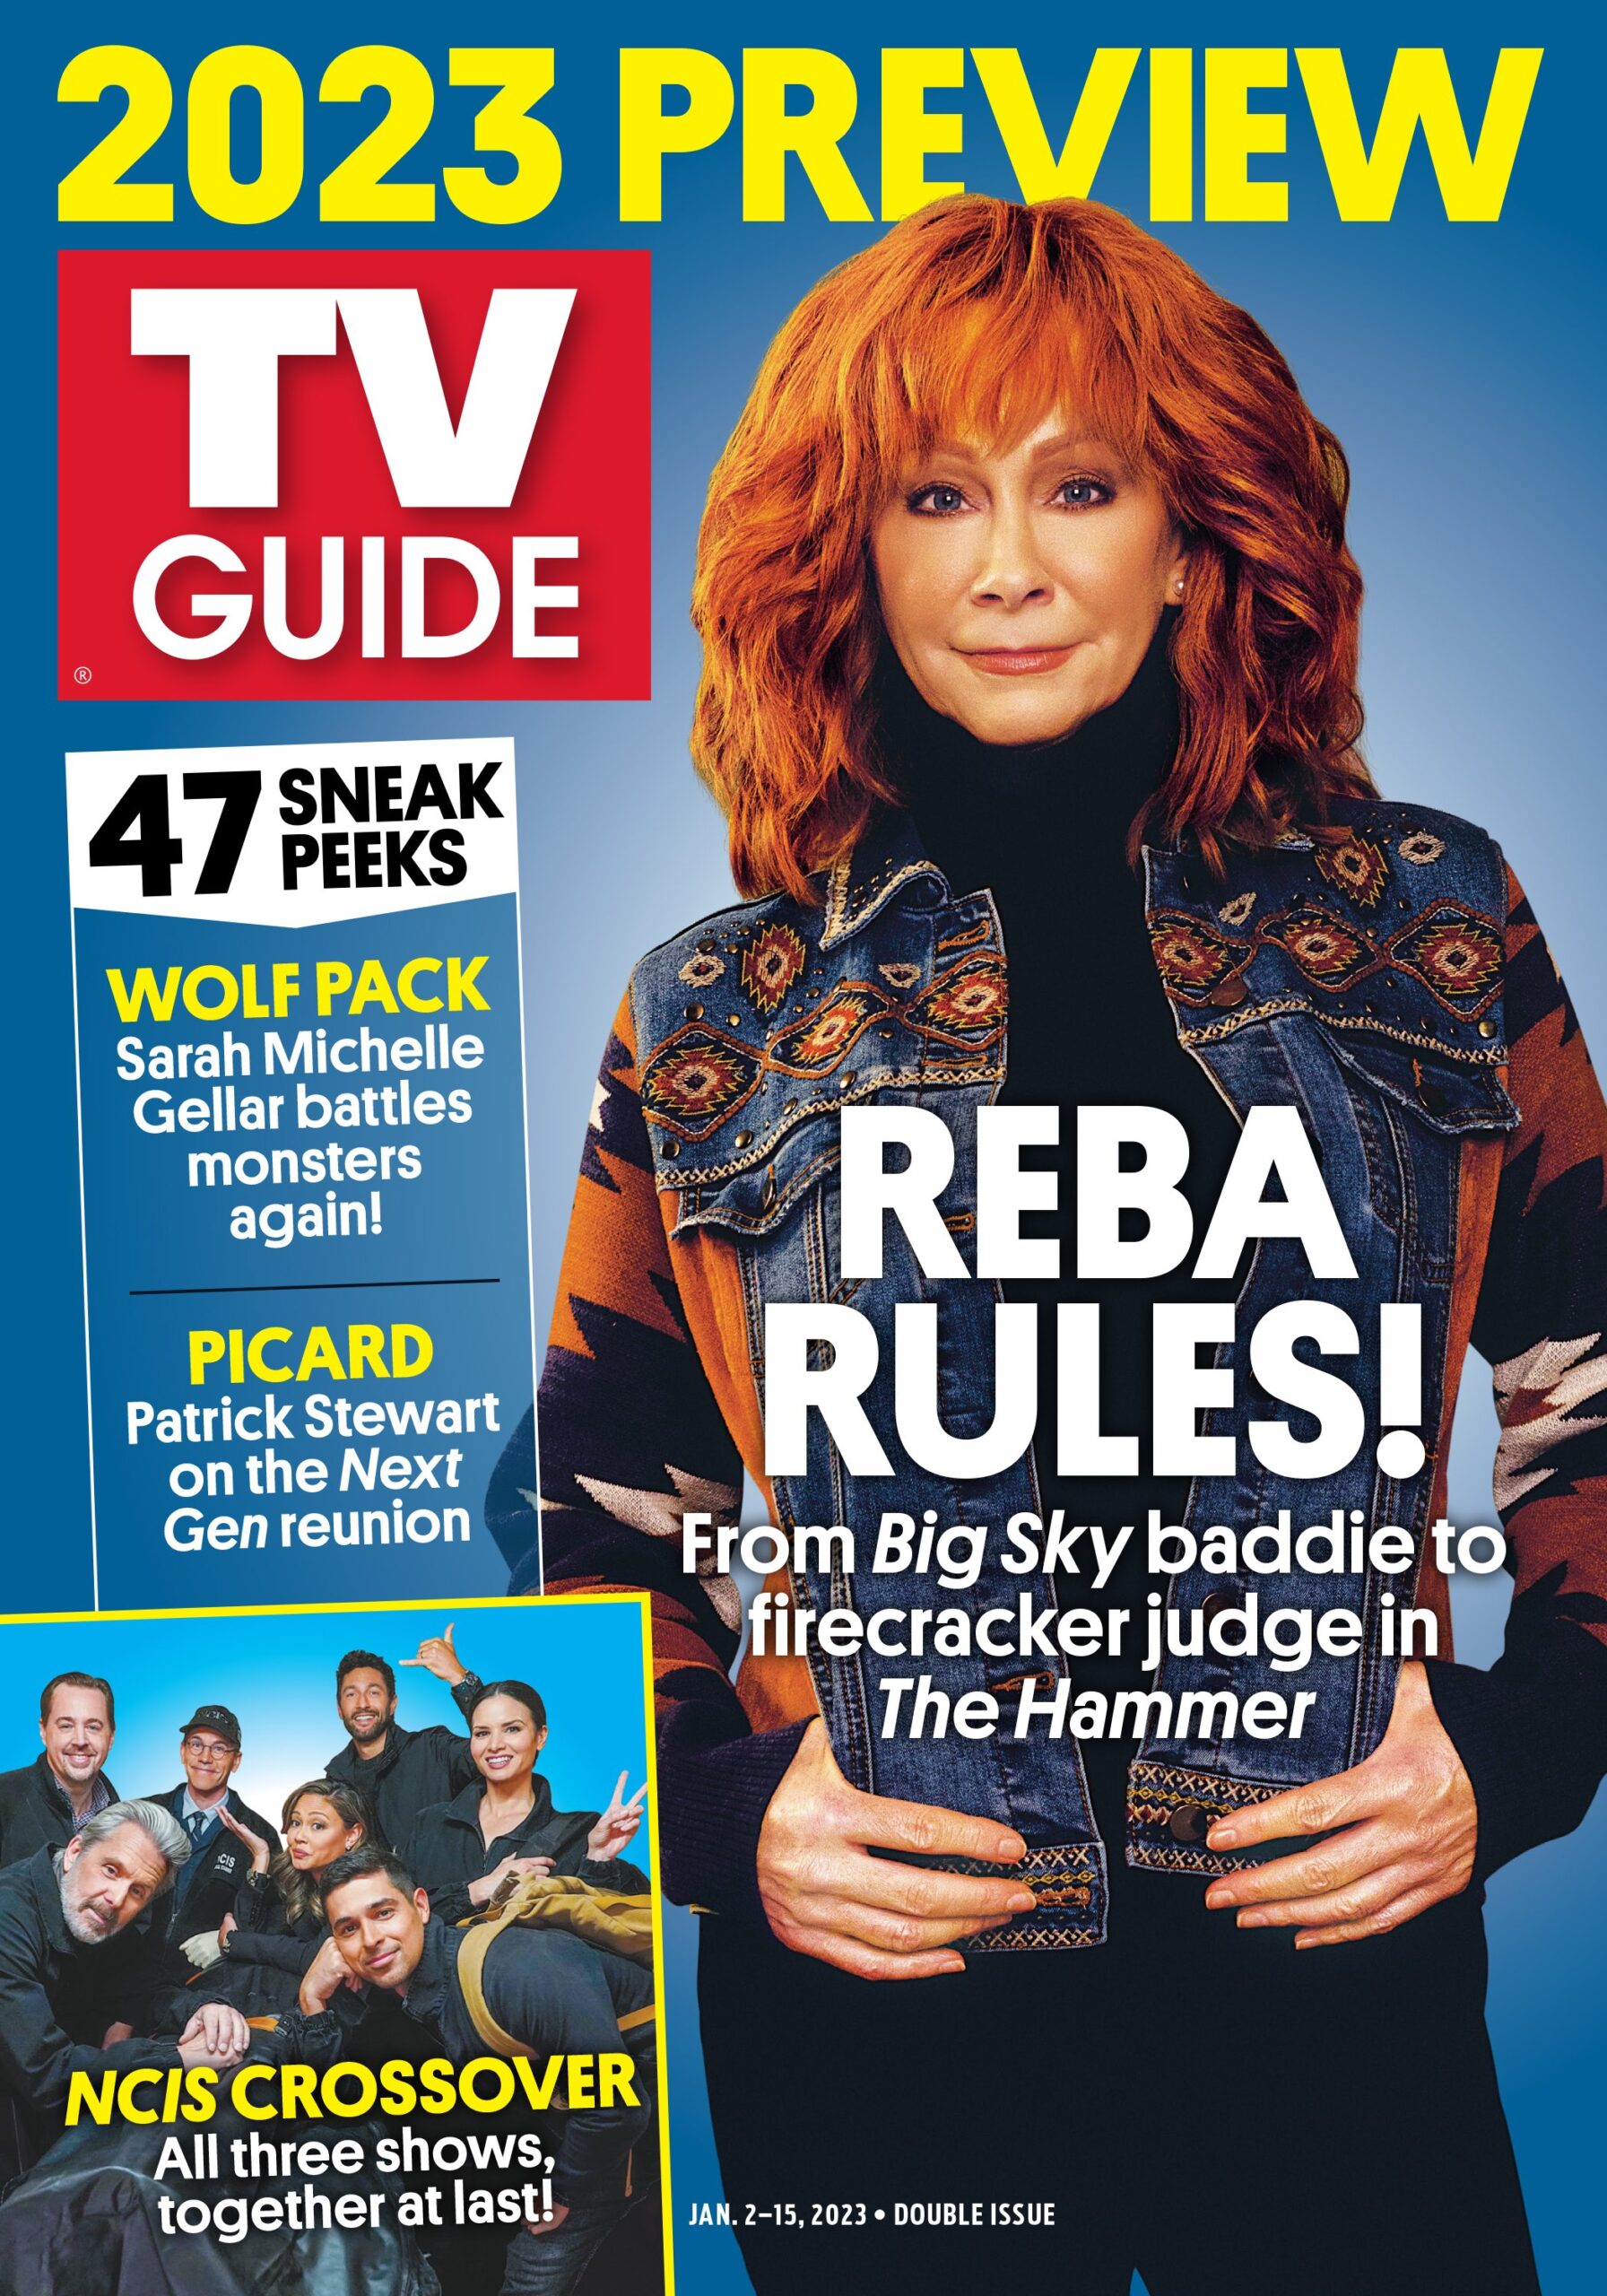 2023 PREVIEW; TV Guide; 47 SNEAK PEEKS, WOLF PACK: Sarah Michelle Gellar battles monsters again!; PICARD: Patrick Stewart on the 'Next Gen' reunion; NCIS CROSSOVER: All three shows together at last!; REBA RULES! From 'Big Sky' baddie to firecracker judge in 'The Hammer'